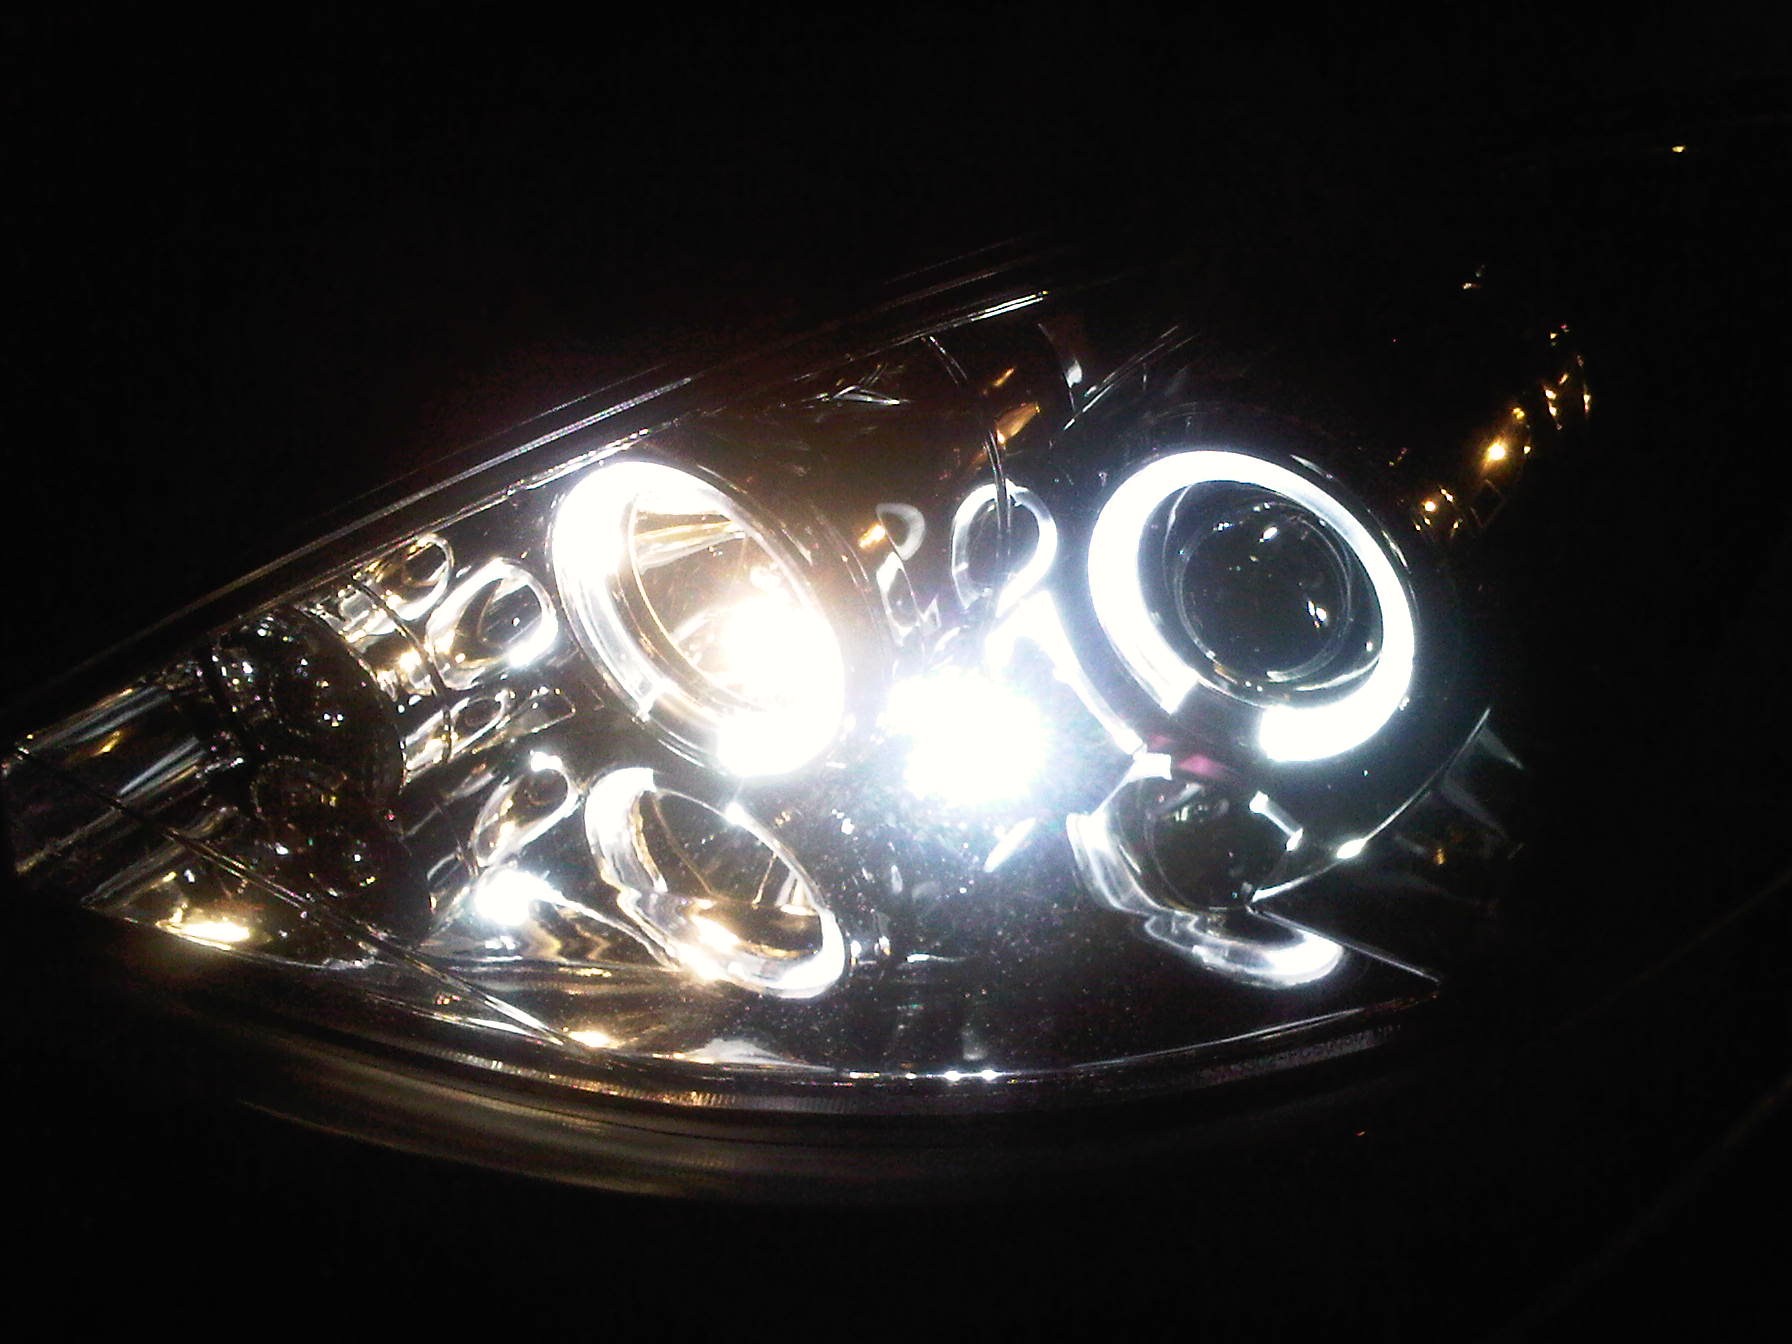 Mk1 Facelift Hid Upgrade - Ford Focus Club - Ford Owners Club - Ford Forums